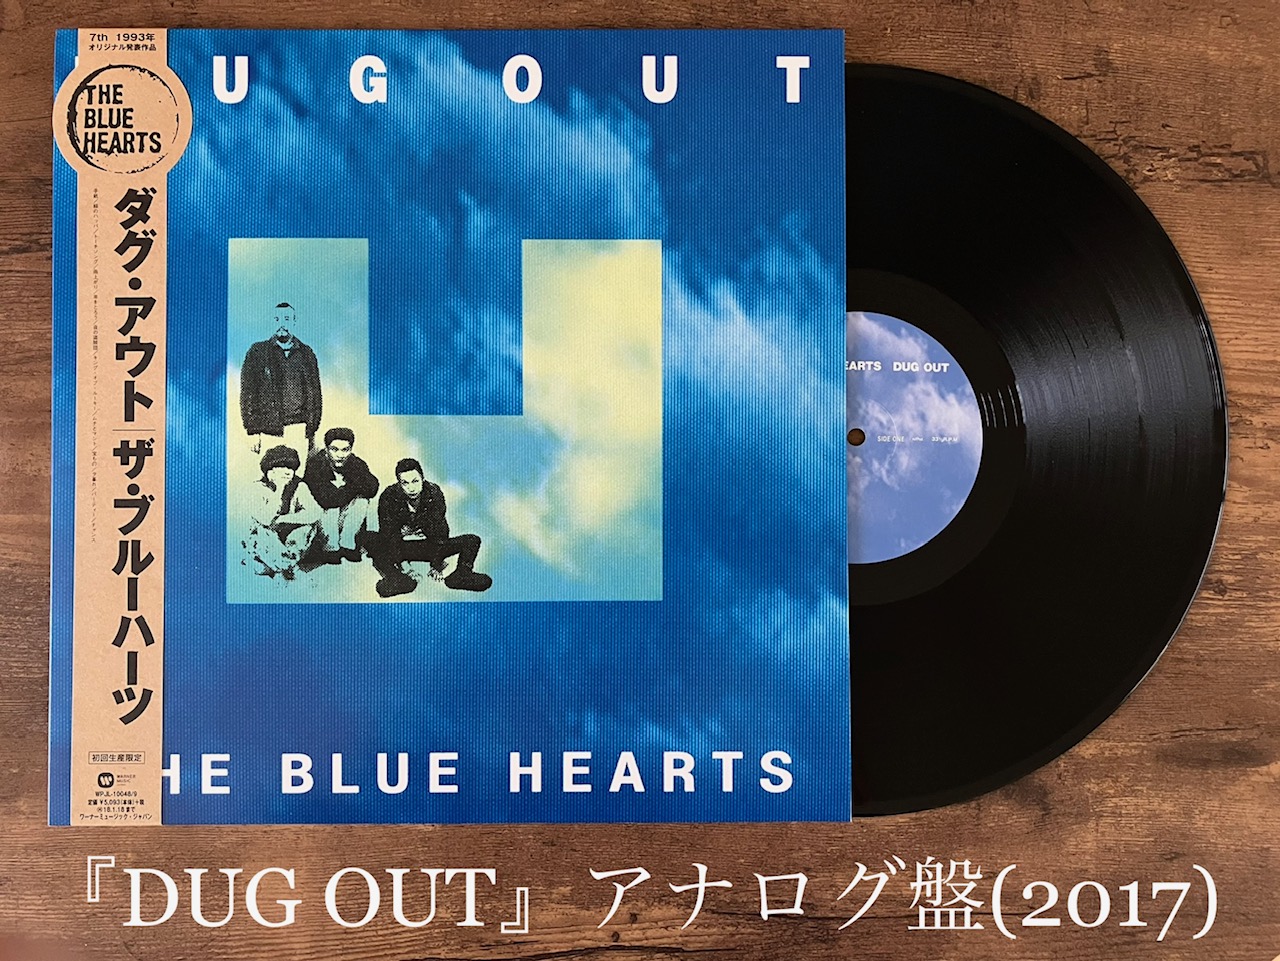 THE BLUE HEARTS/DUG OUT 大らかな聴き心地！魅力的なバラードの包容感